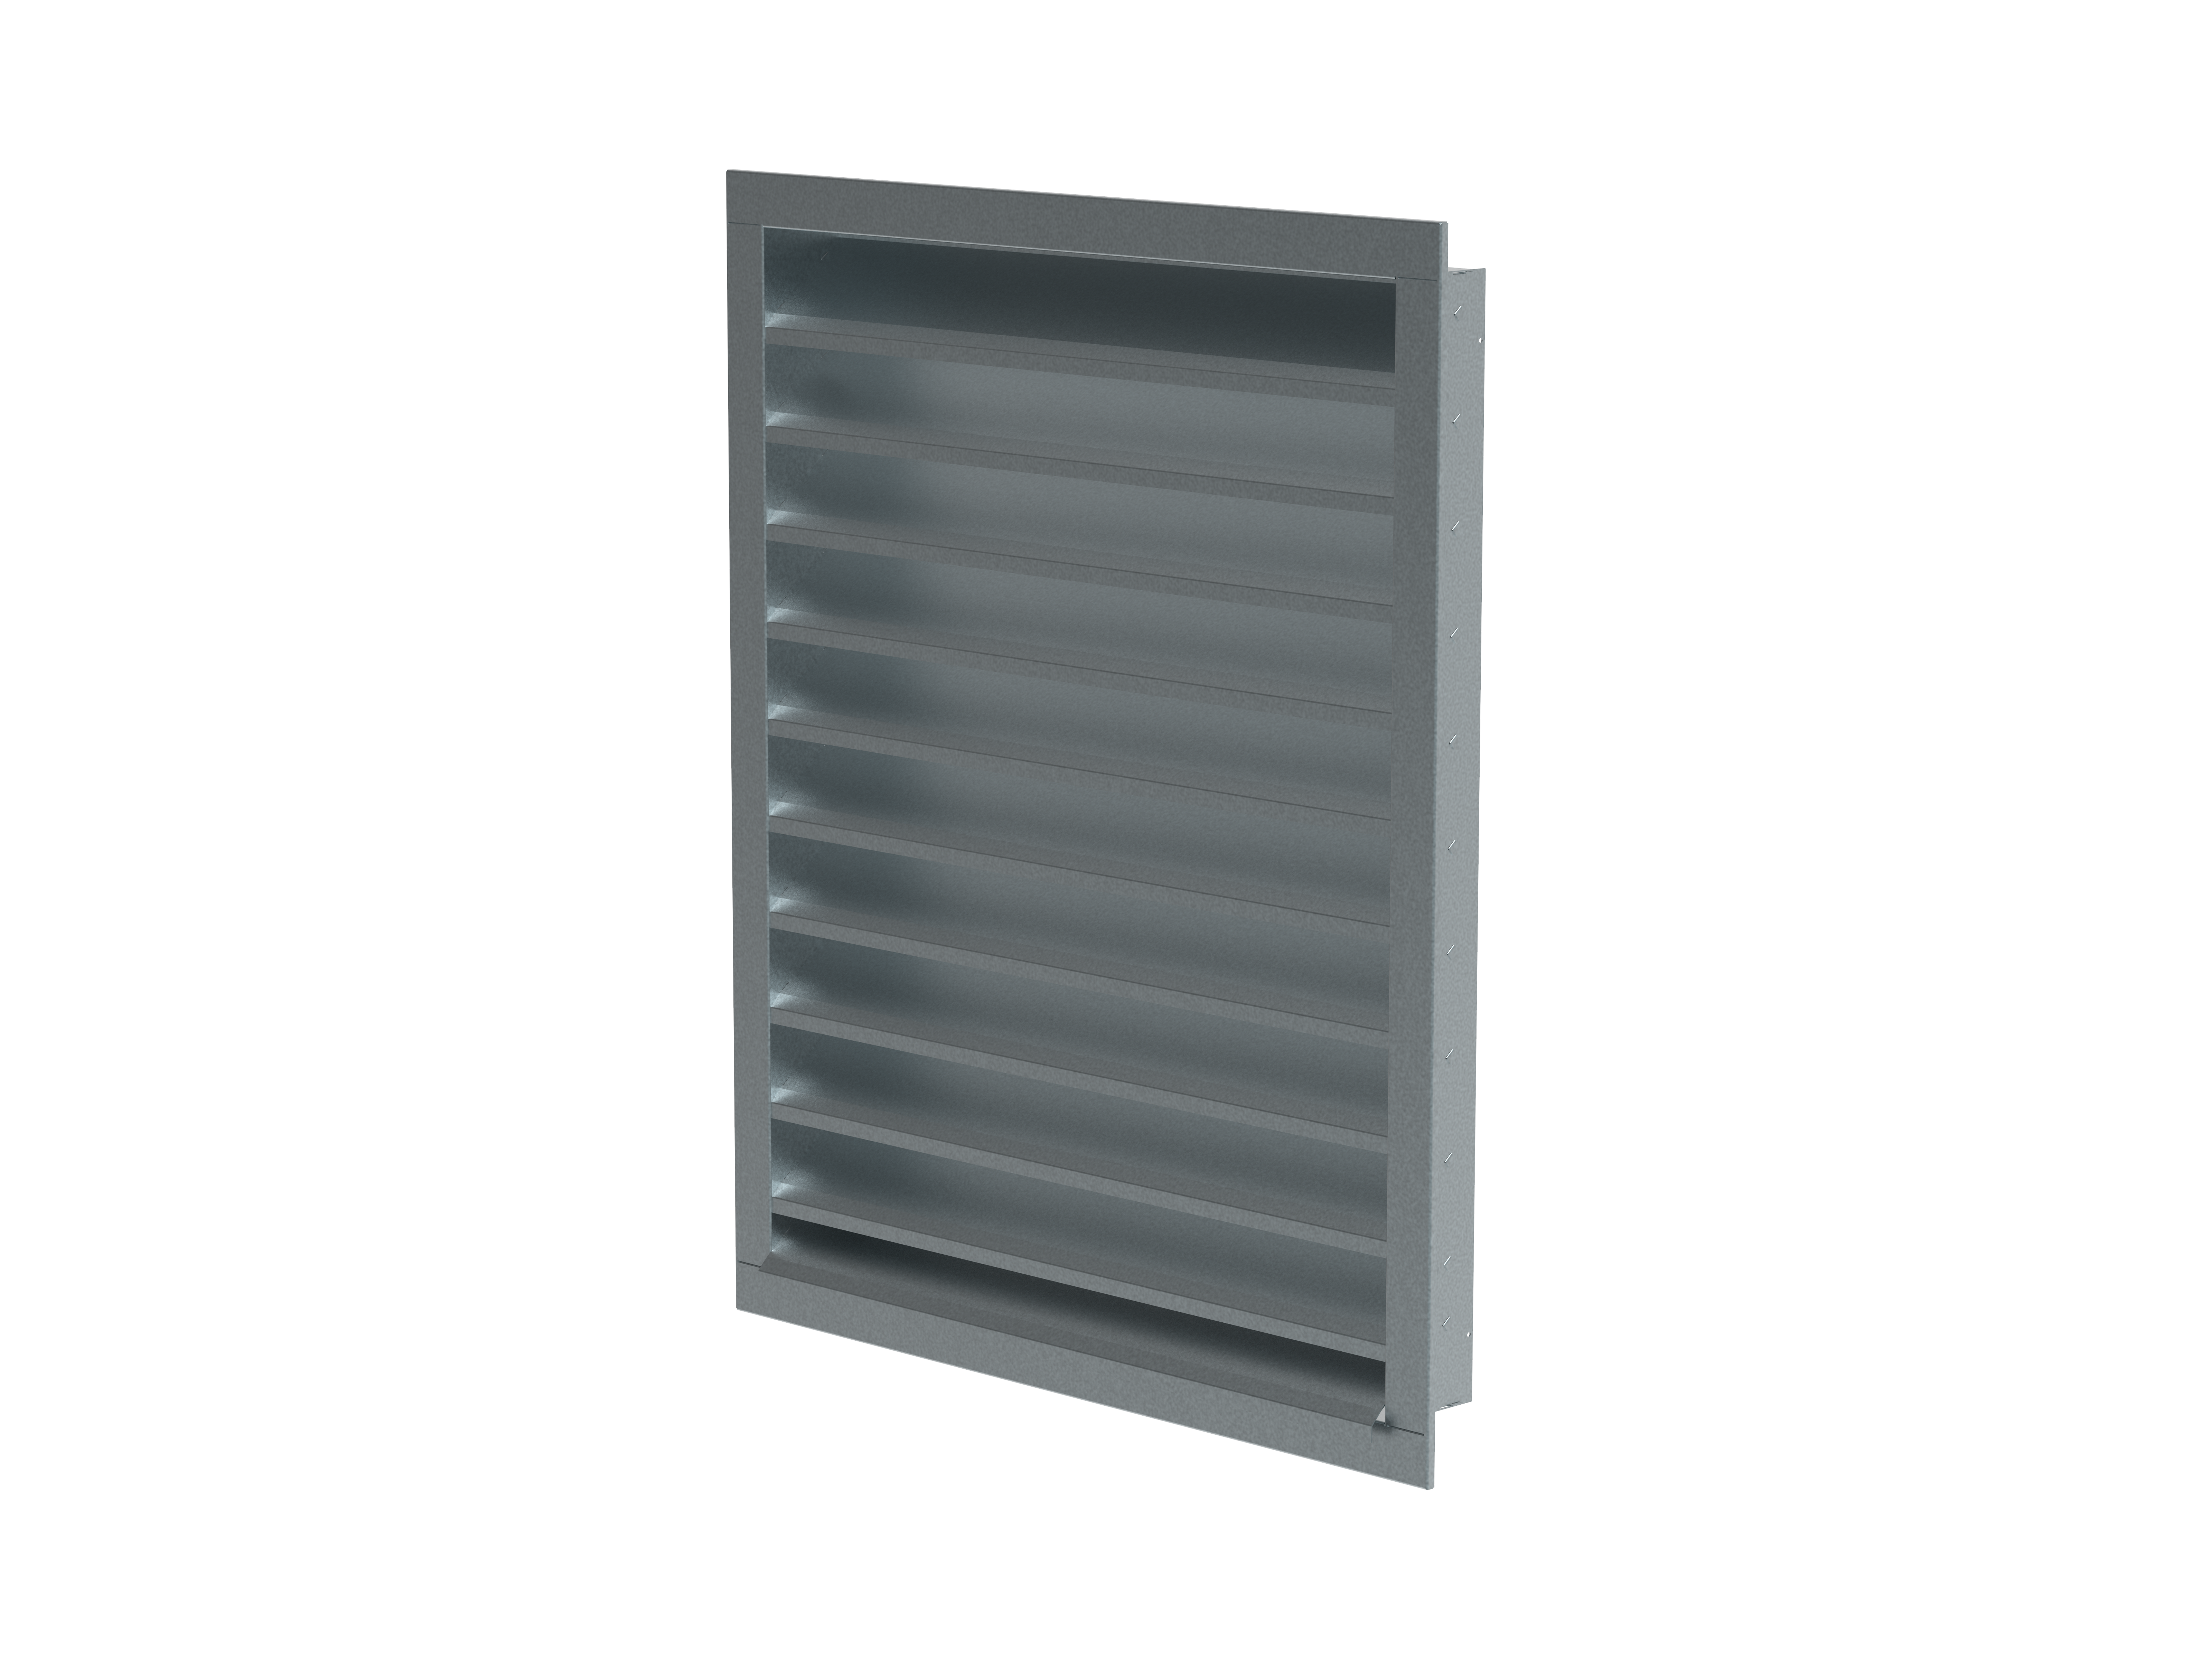 PZZNS - Louvres - Air Distribution Products - Products - Systemair